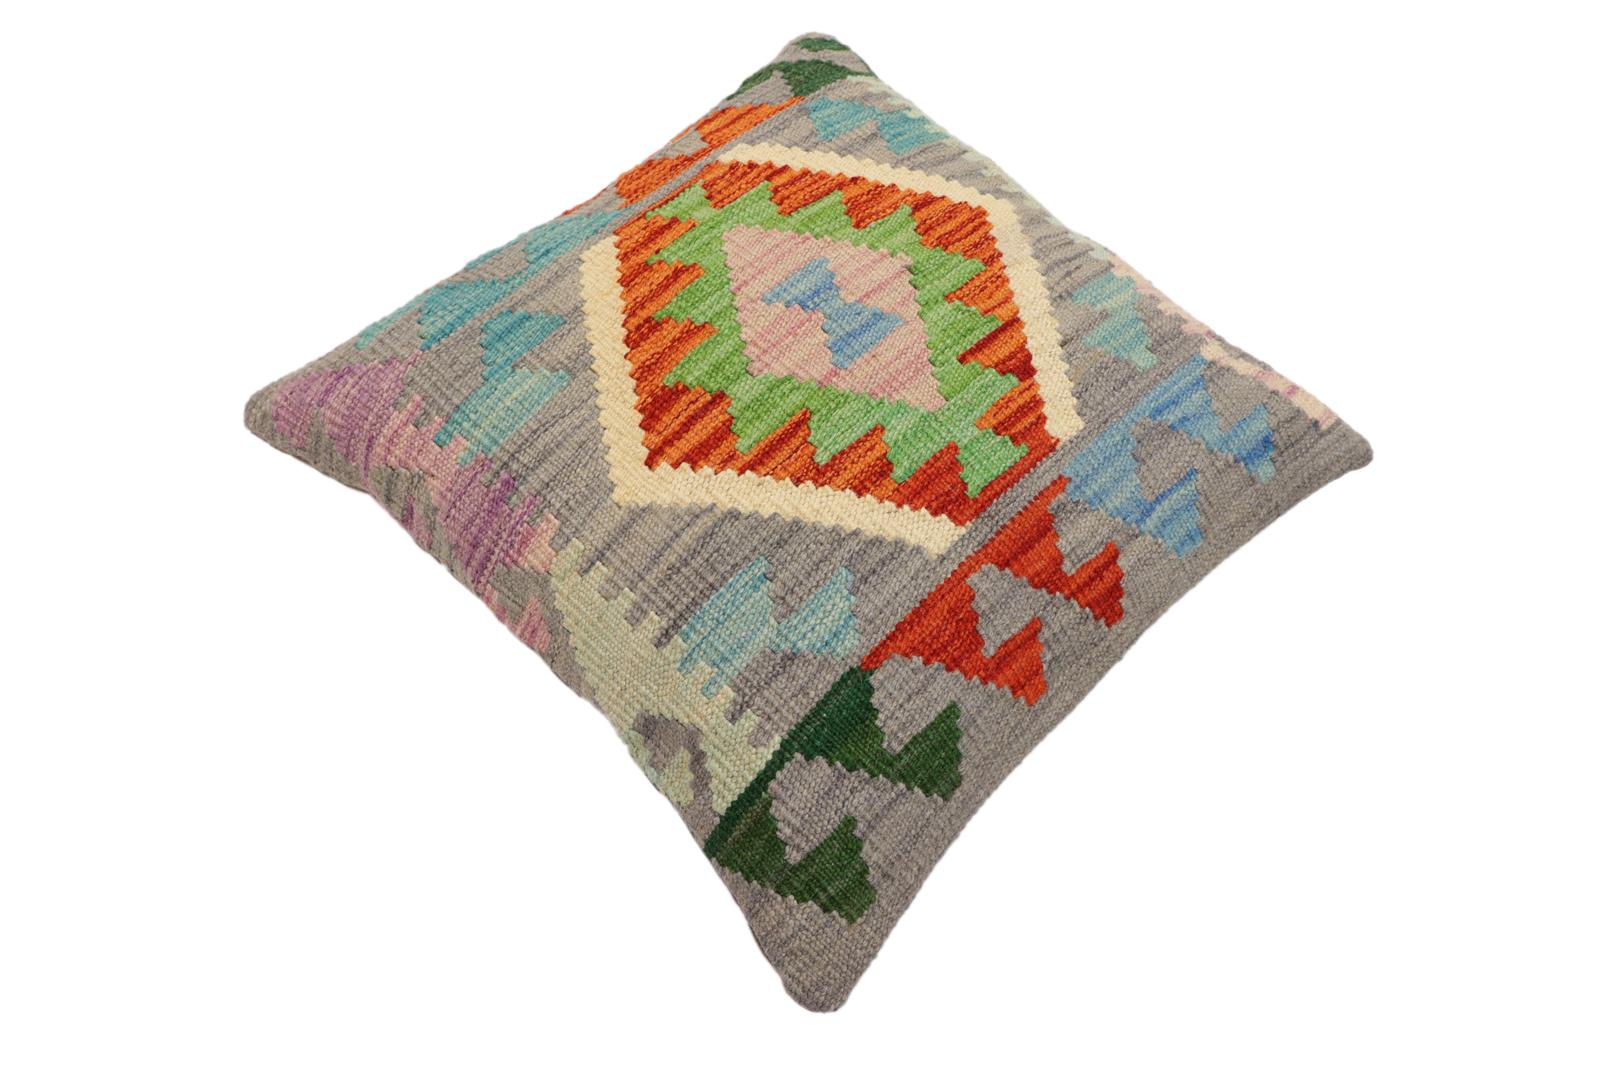 handmade Traditional Pillow Gray Rust Hand-Woven SQUARE 100% WOOL Hand woven turkish pillow2' x 2'